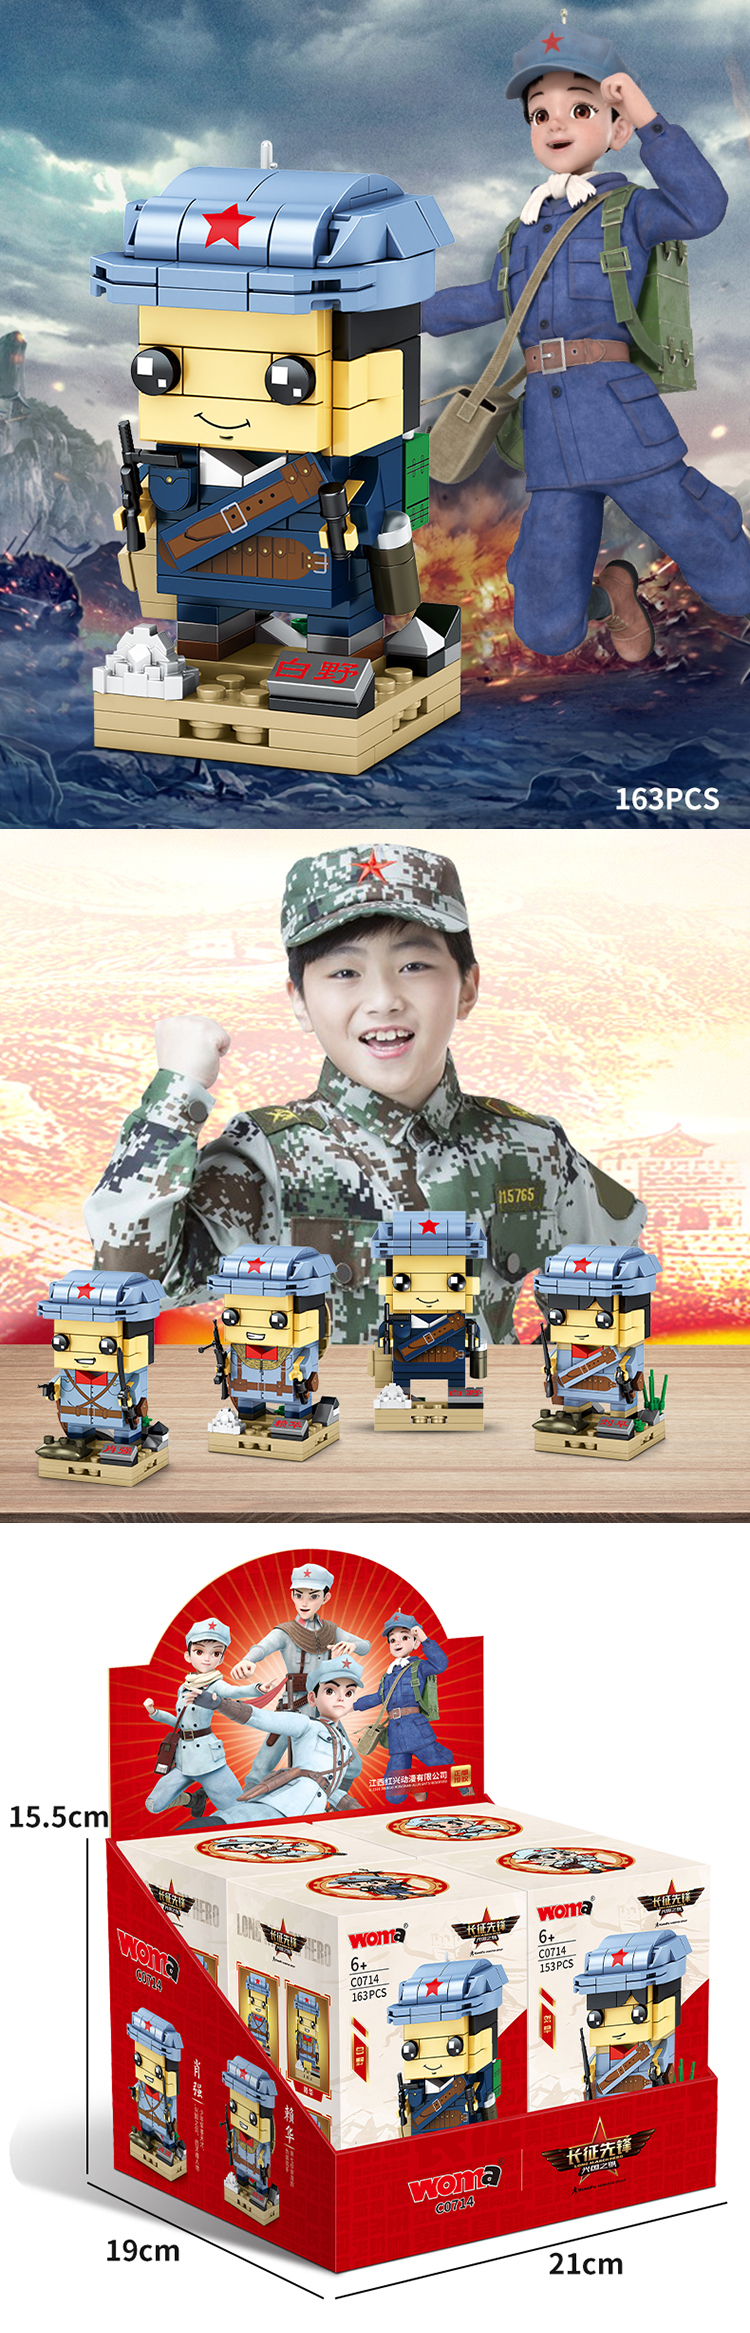 WOMA TOYS OEM ODM Home Decor Movie Role Military Army Warrior Mini Soldier Figures With Weapons Model Brick Building Blocks